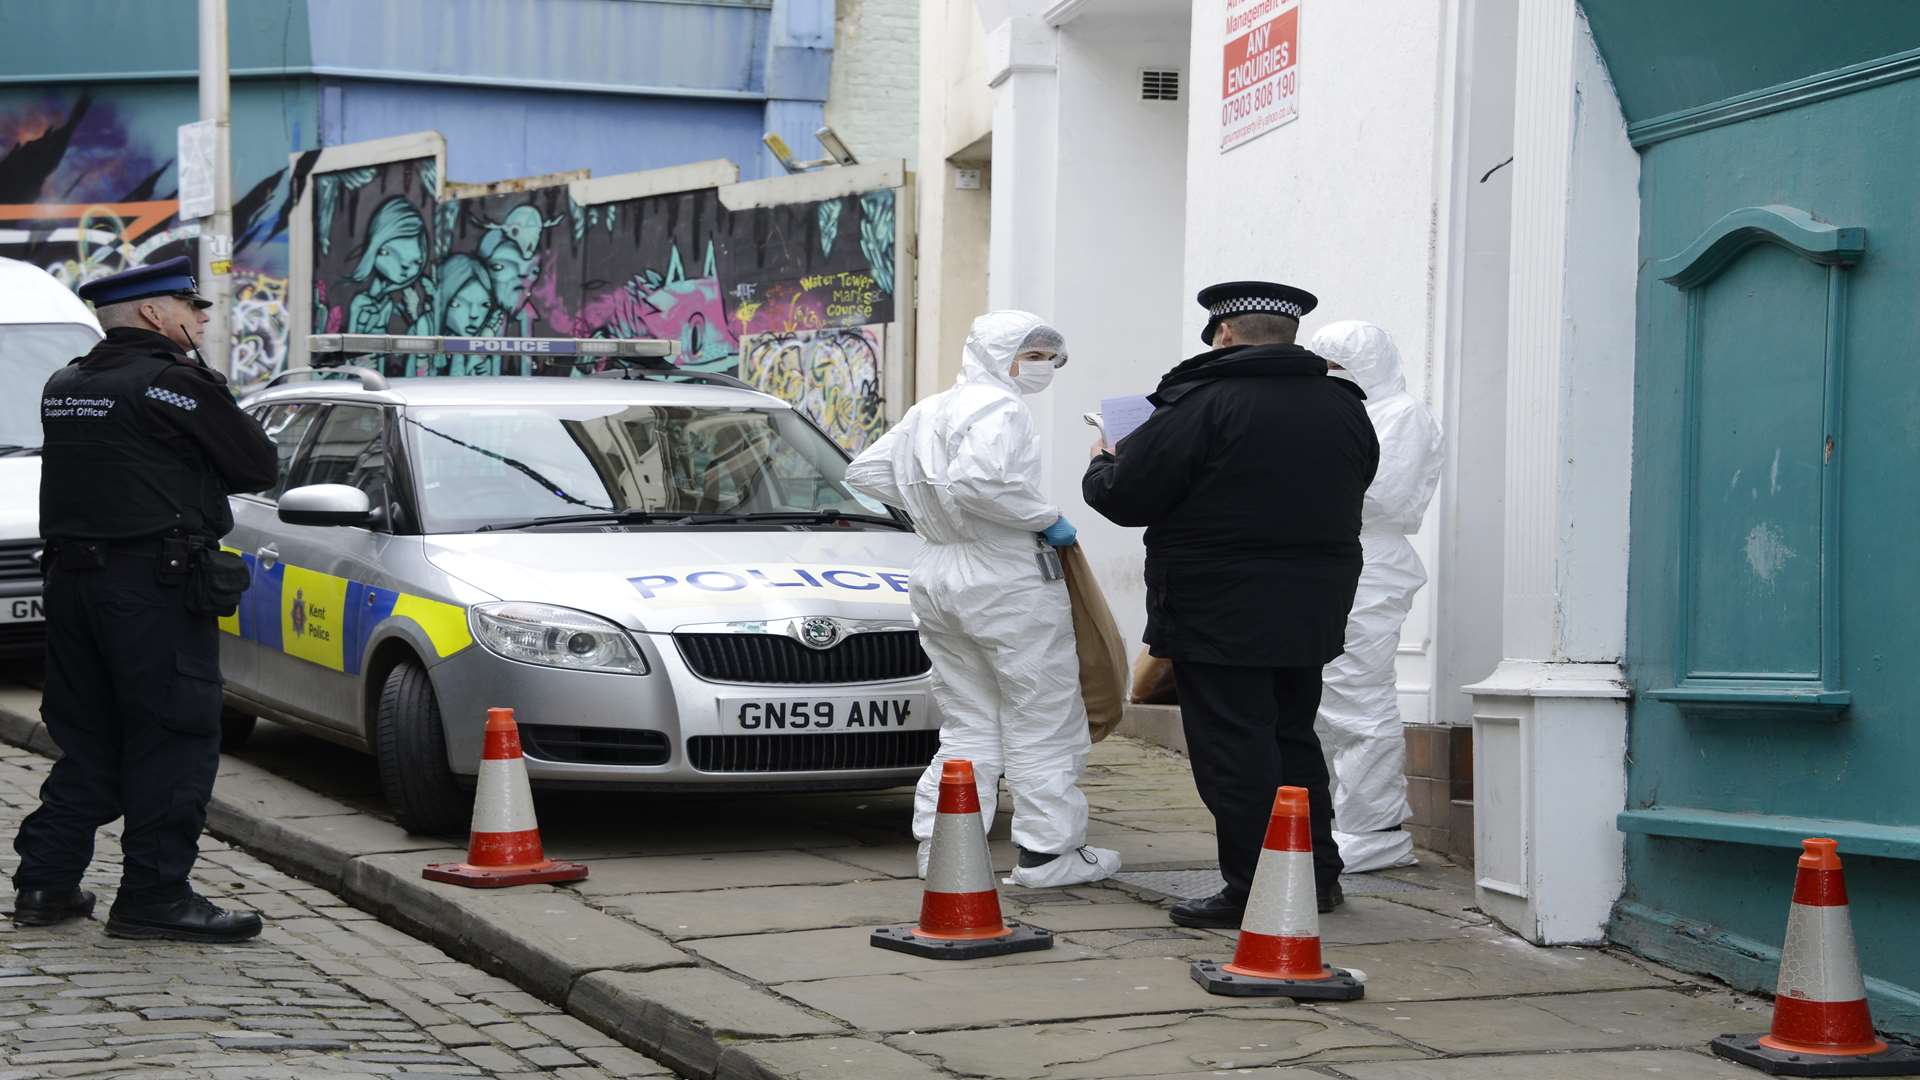 Police investigating the incident at Folkestone's Old High Street.